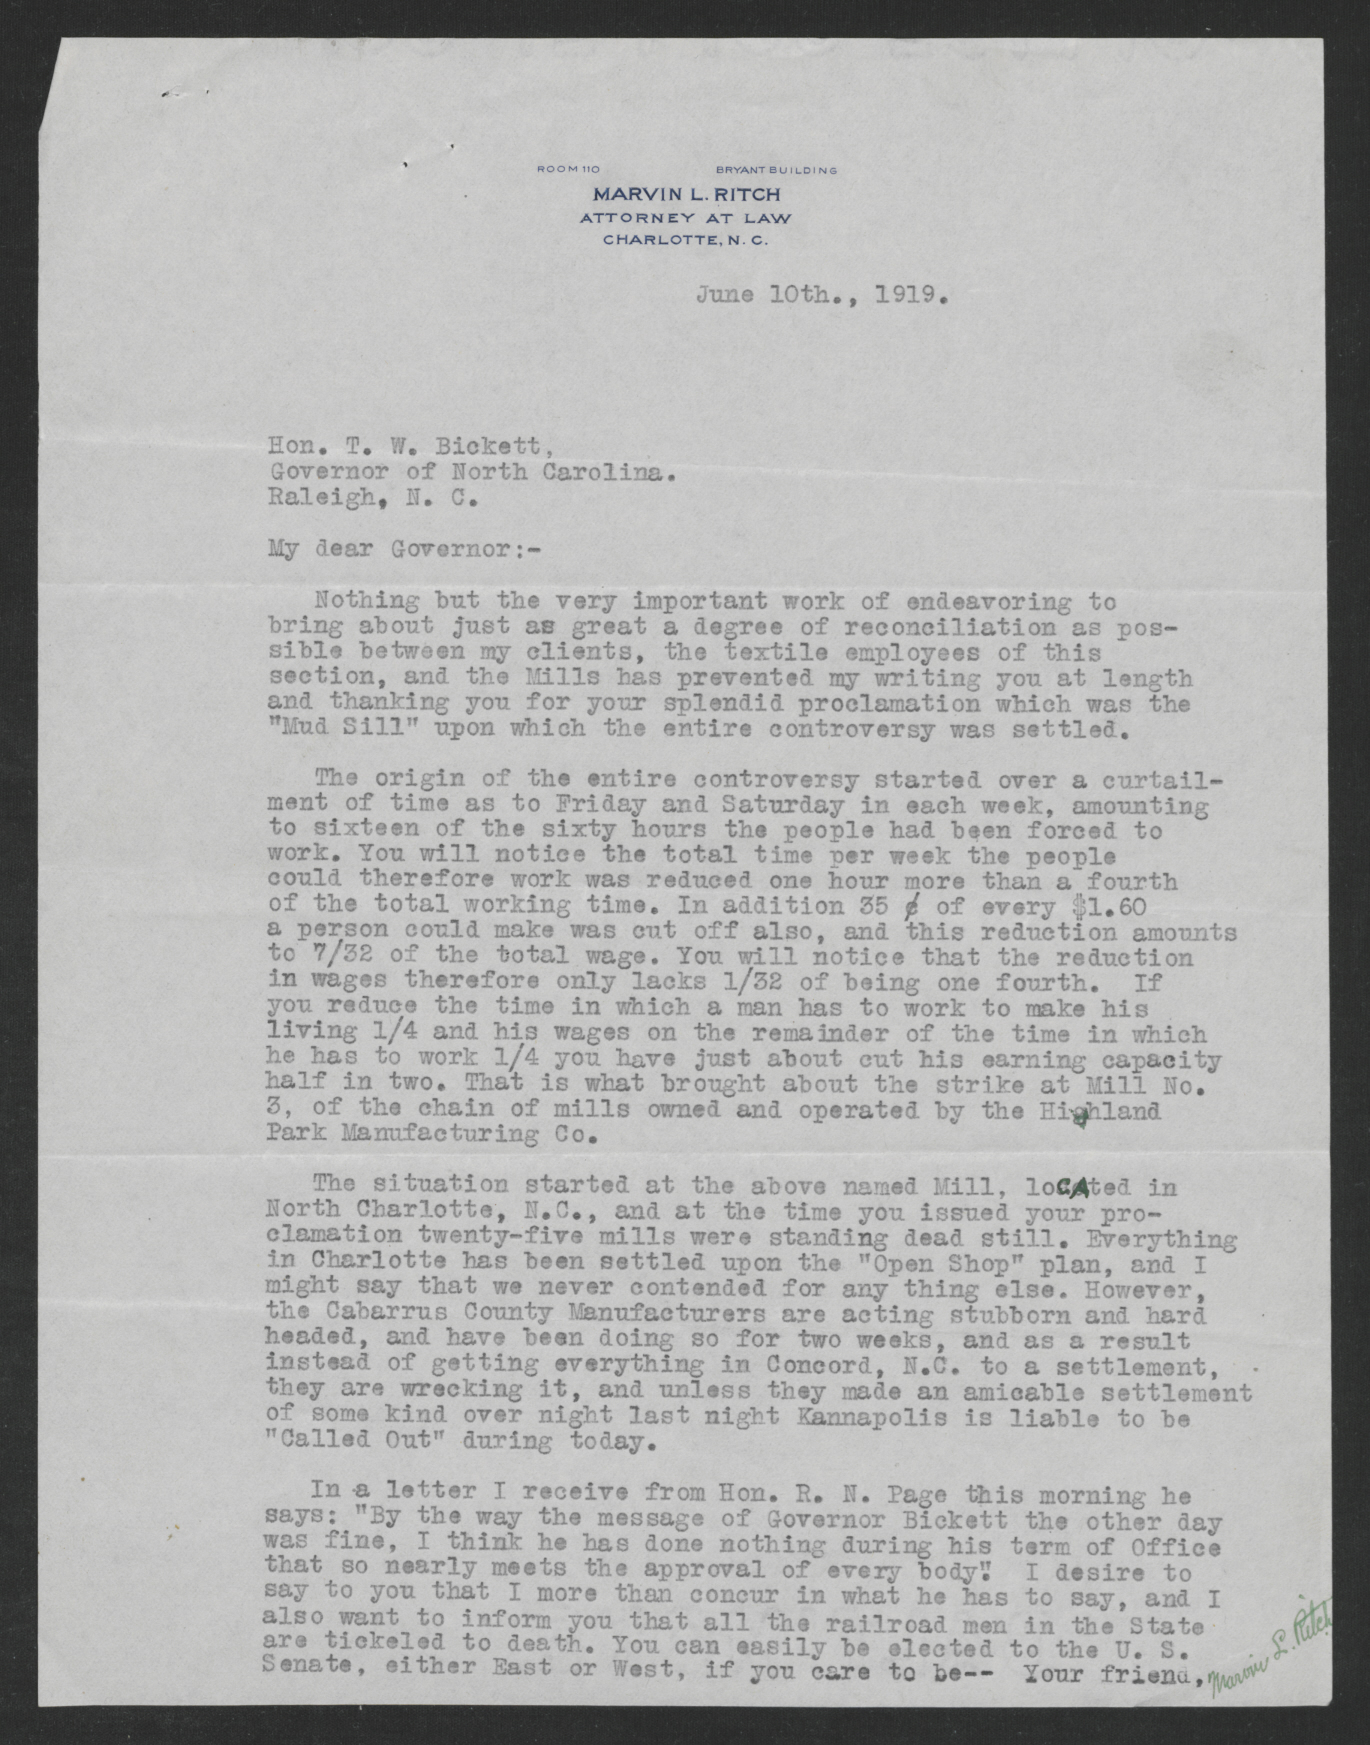 Letter from Marvin L. Ritch to Thomas W. Bickett, June 10, 1919